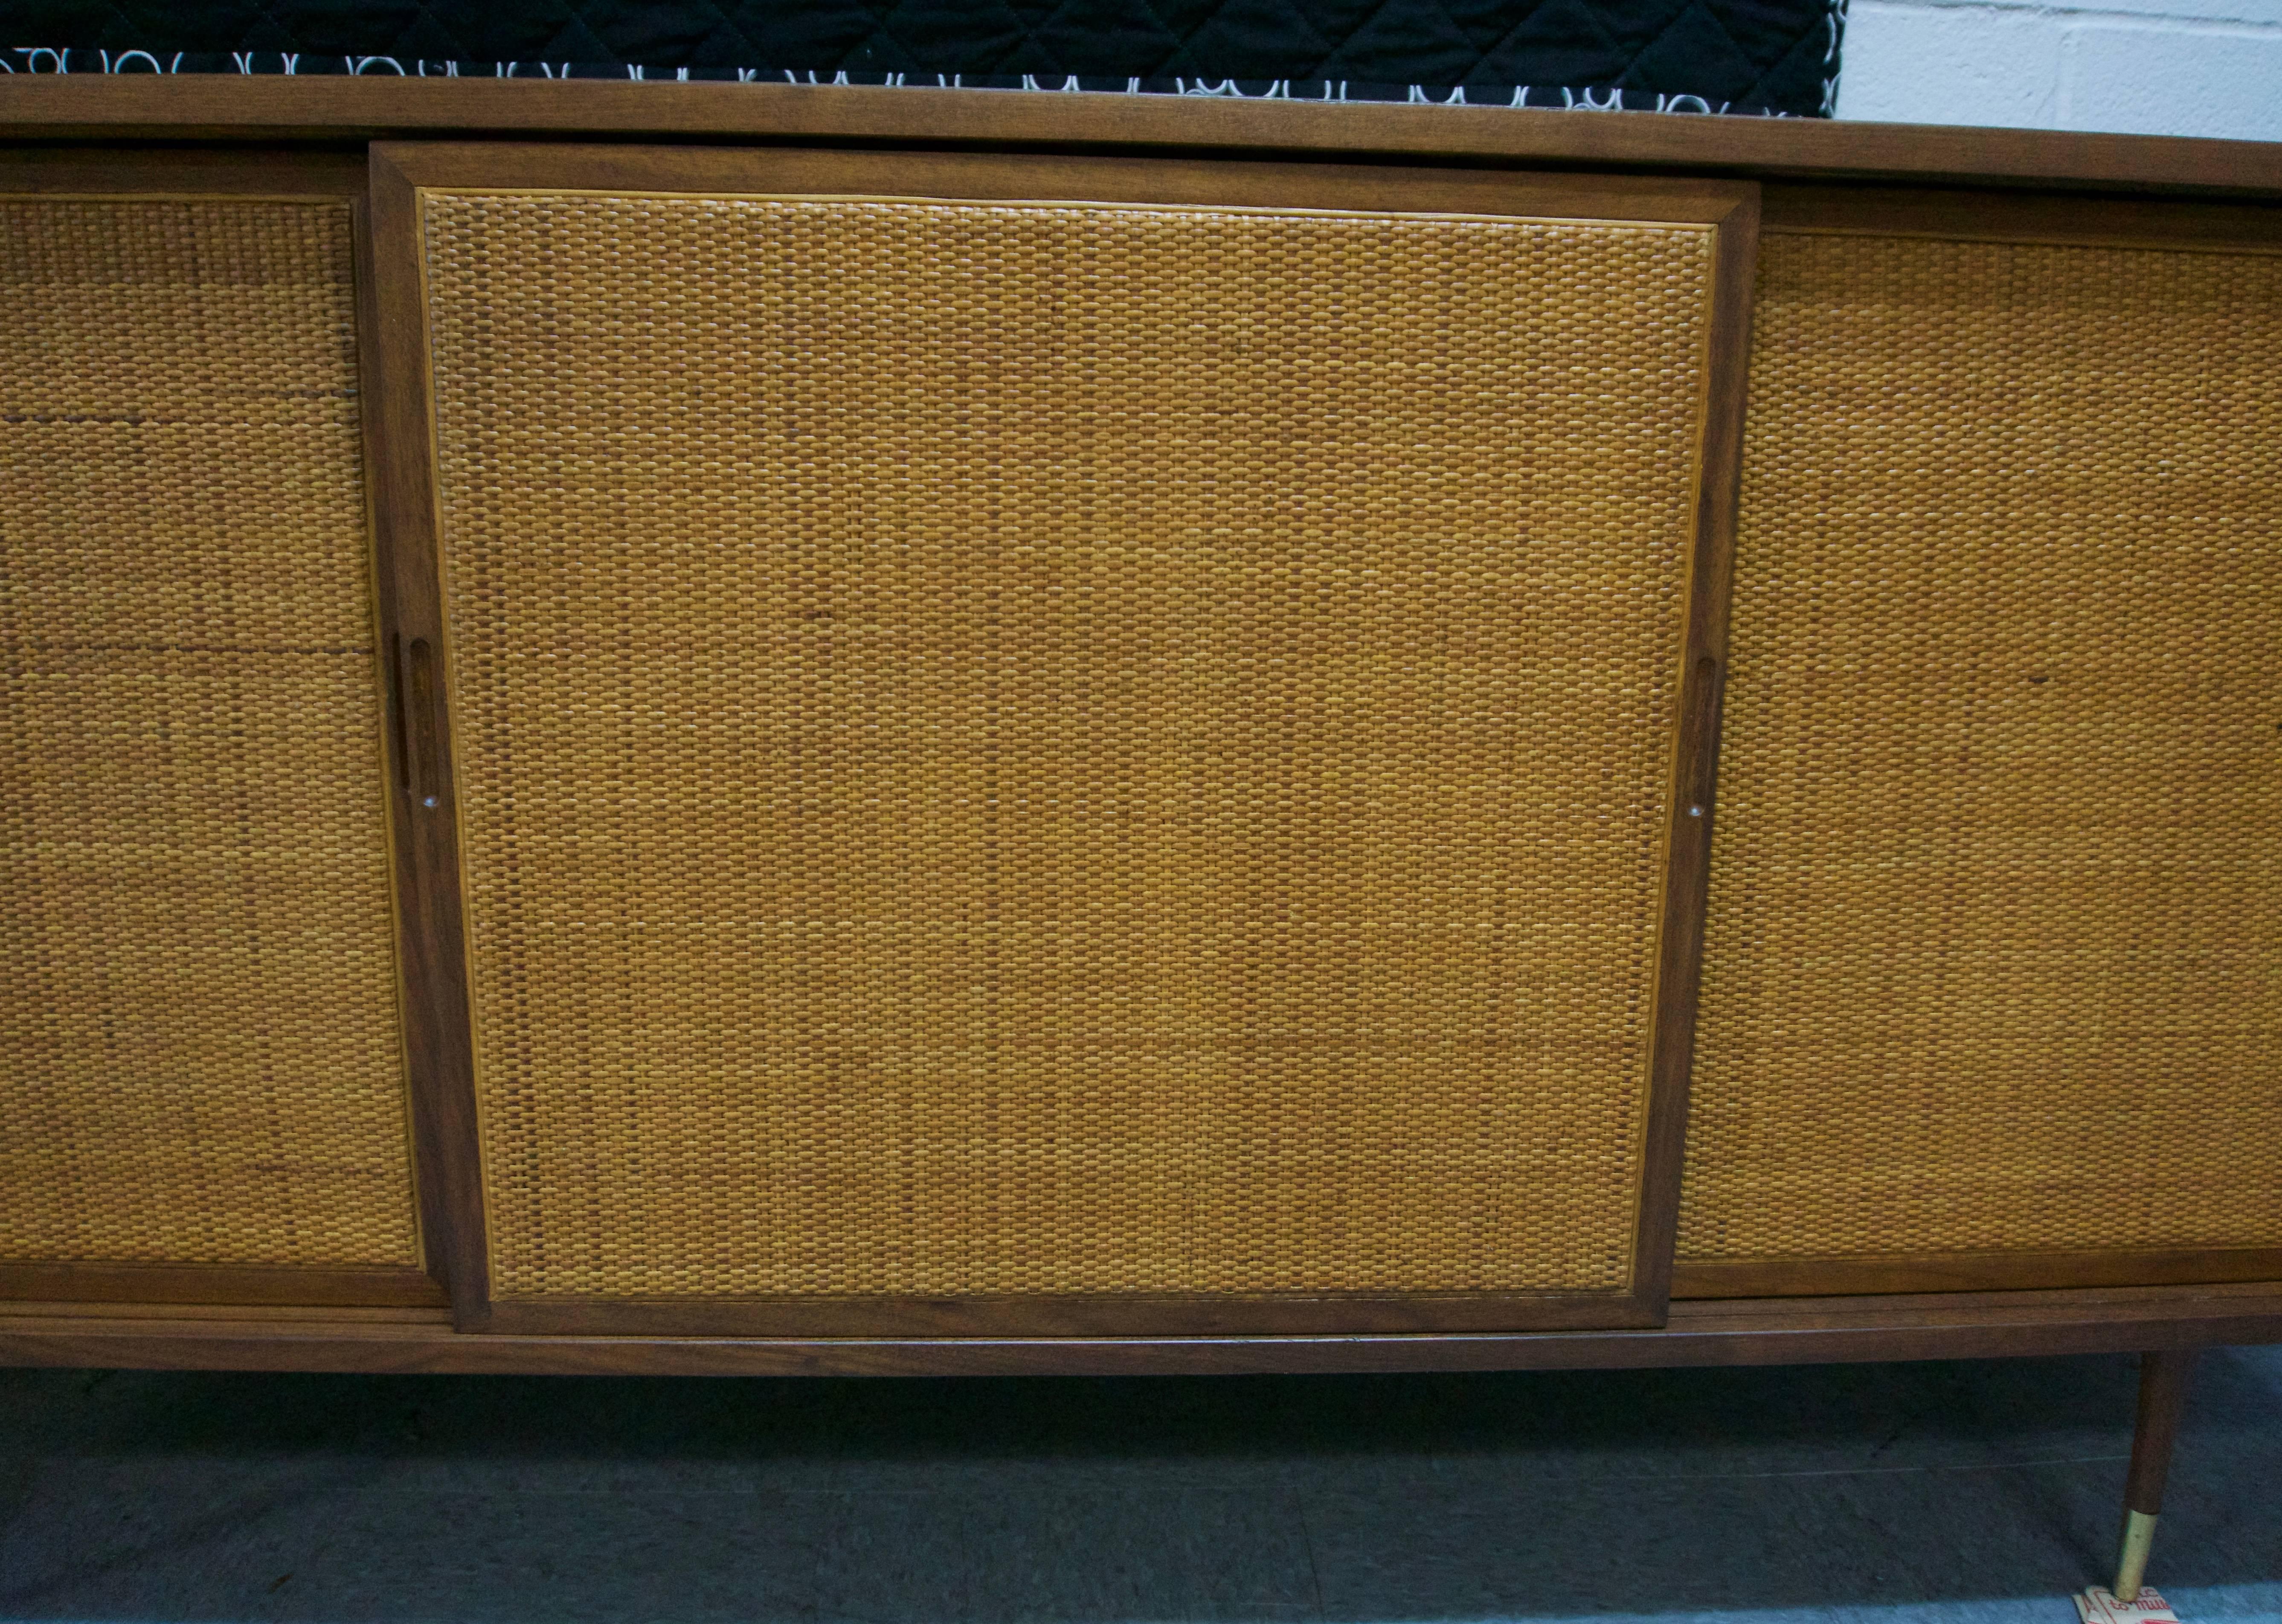 Restored walnut credenza with sliding woven cane doors. The interior is black with four natural drawers and two shelves. Brass tips on the feet.